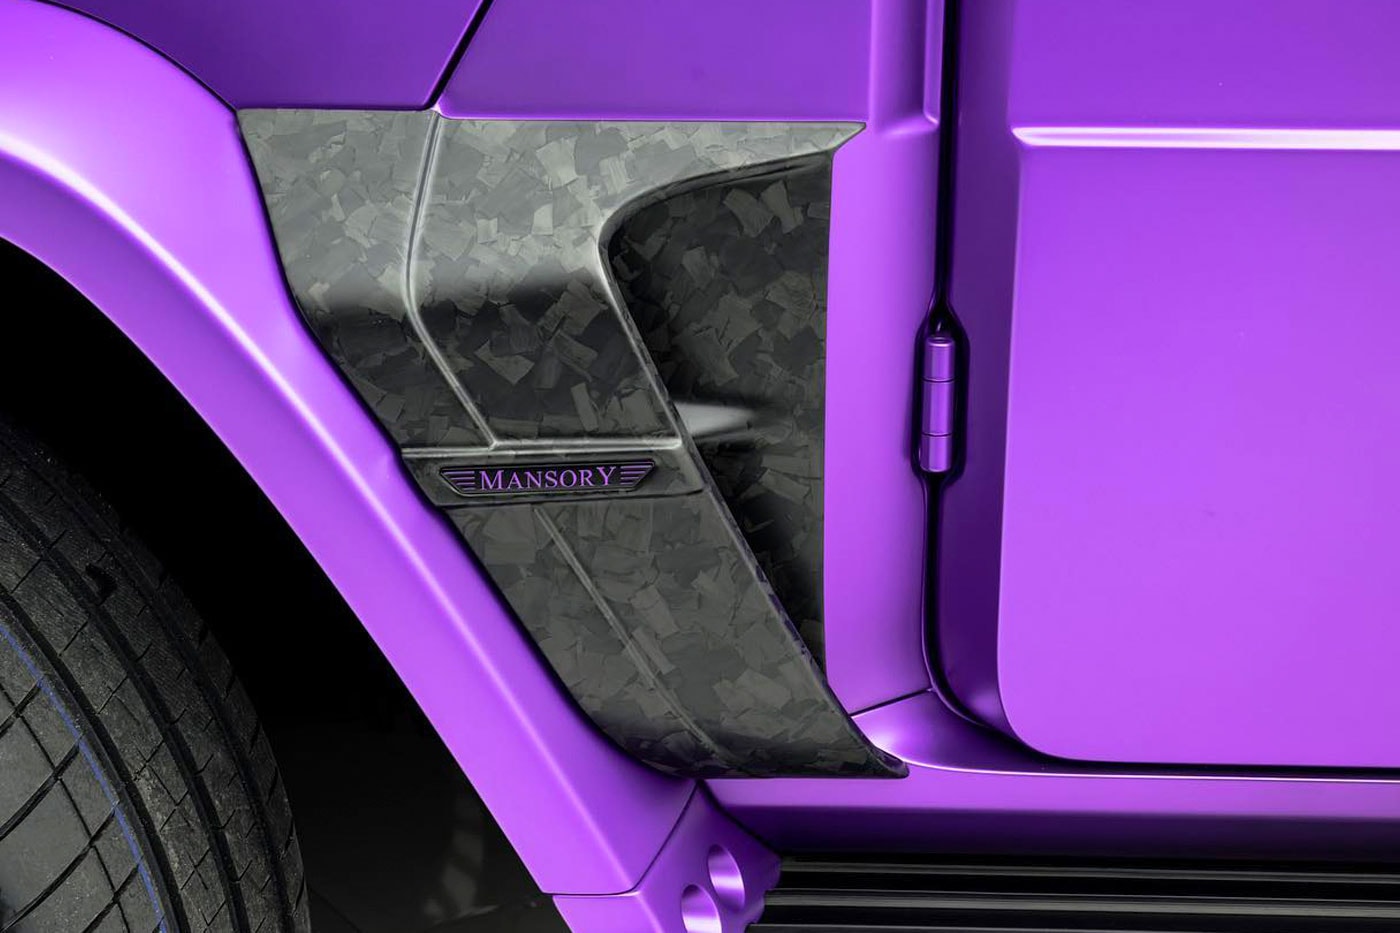 Mansory Mercedes-Benz AMG G63 truck suv purple black UAE Edition lakers colors 4.0 litre twin turbo v8 900 bhp 885 torque release info